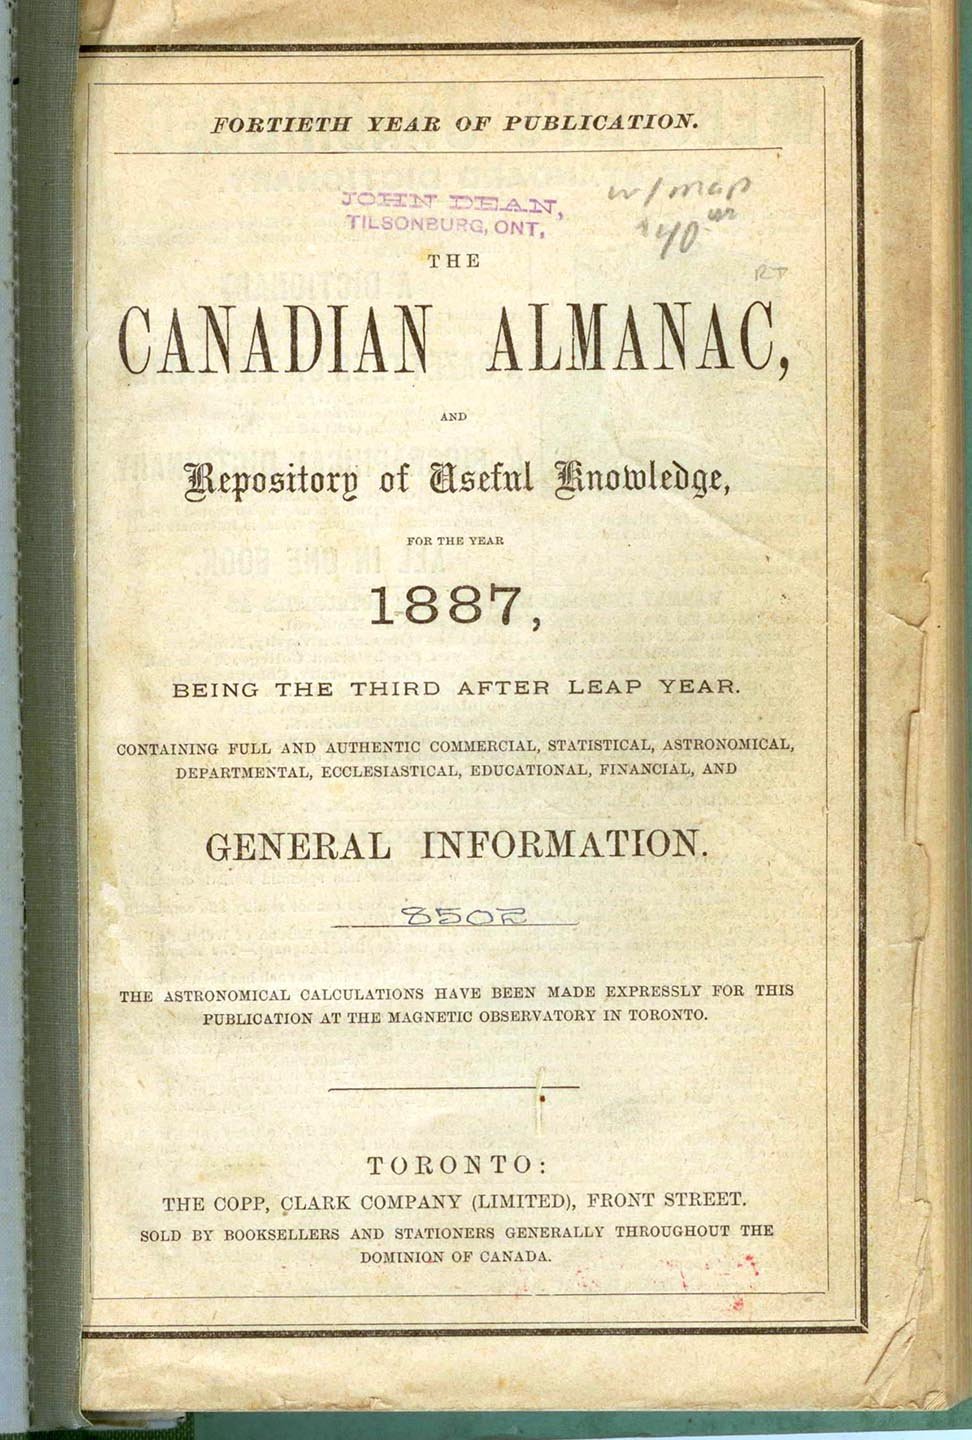 The Canadian Almanac, and Repository of Useful Knowledge for the Year 1887